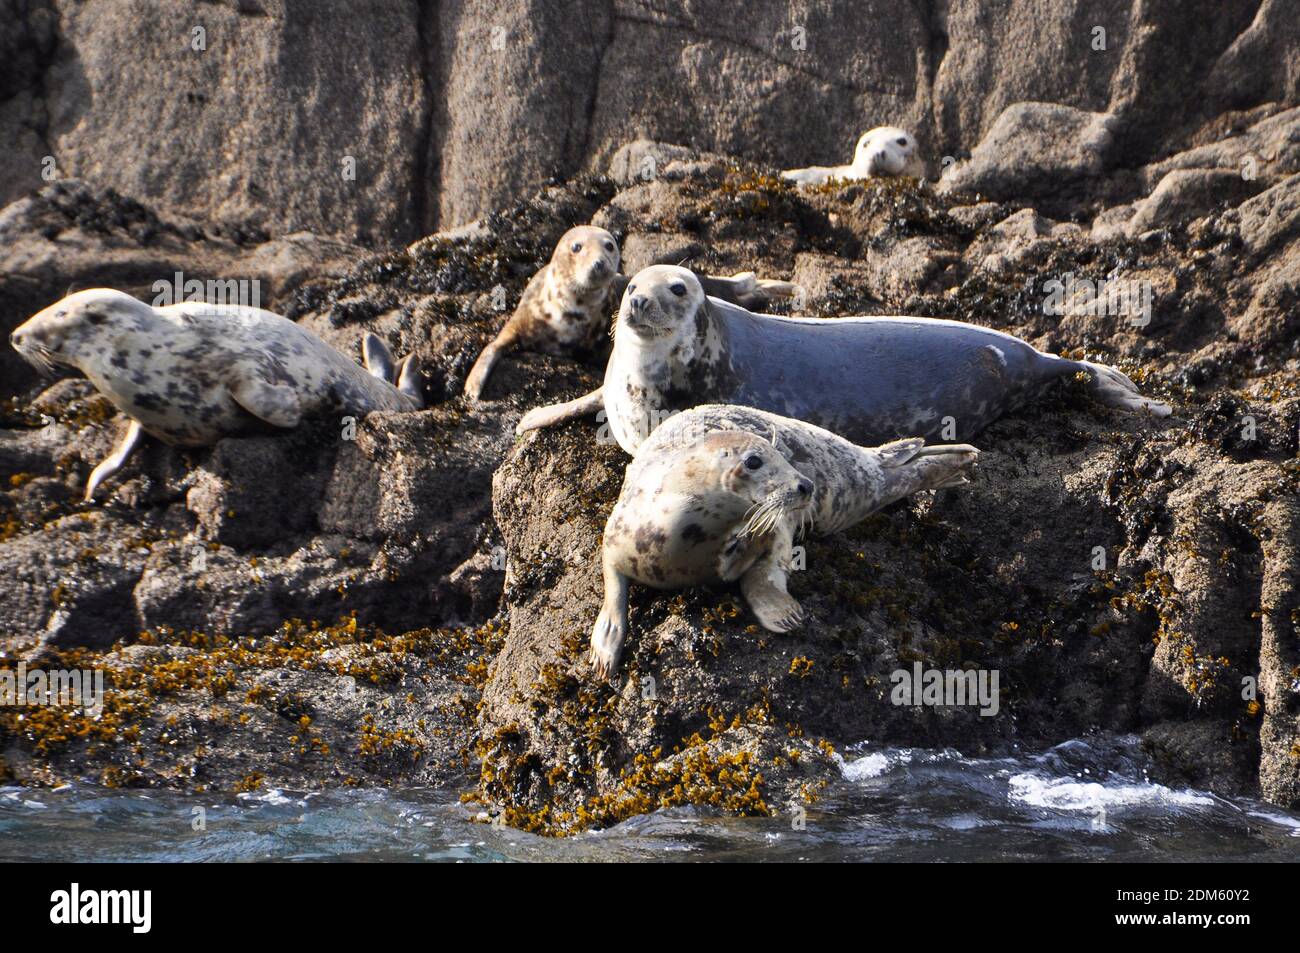 A group of North Atlantic Grey Seals keep a wary eye on a boat full of visitors from the rocks in the Isles of Scilly archipelago. Cornwall, UK Stock Photo